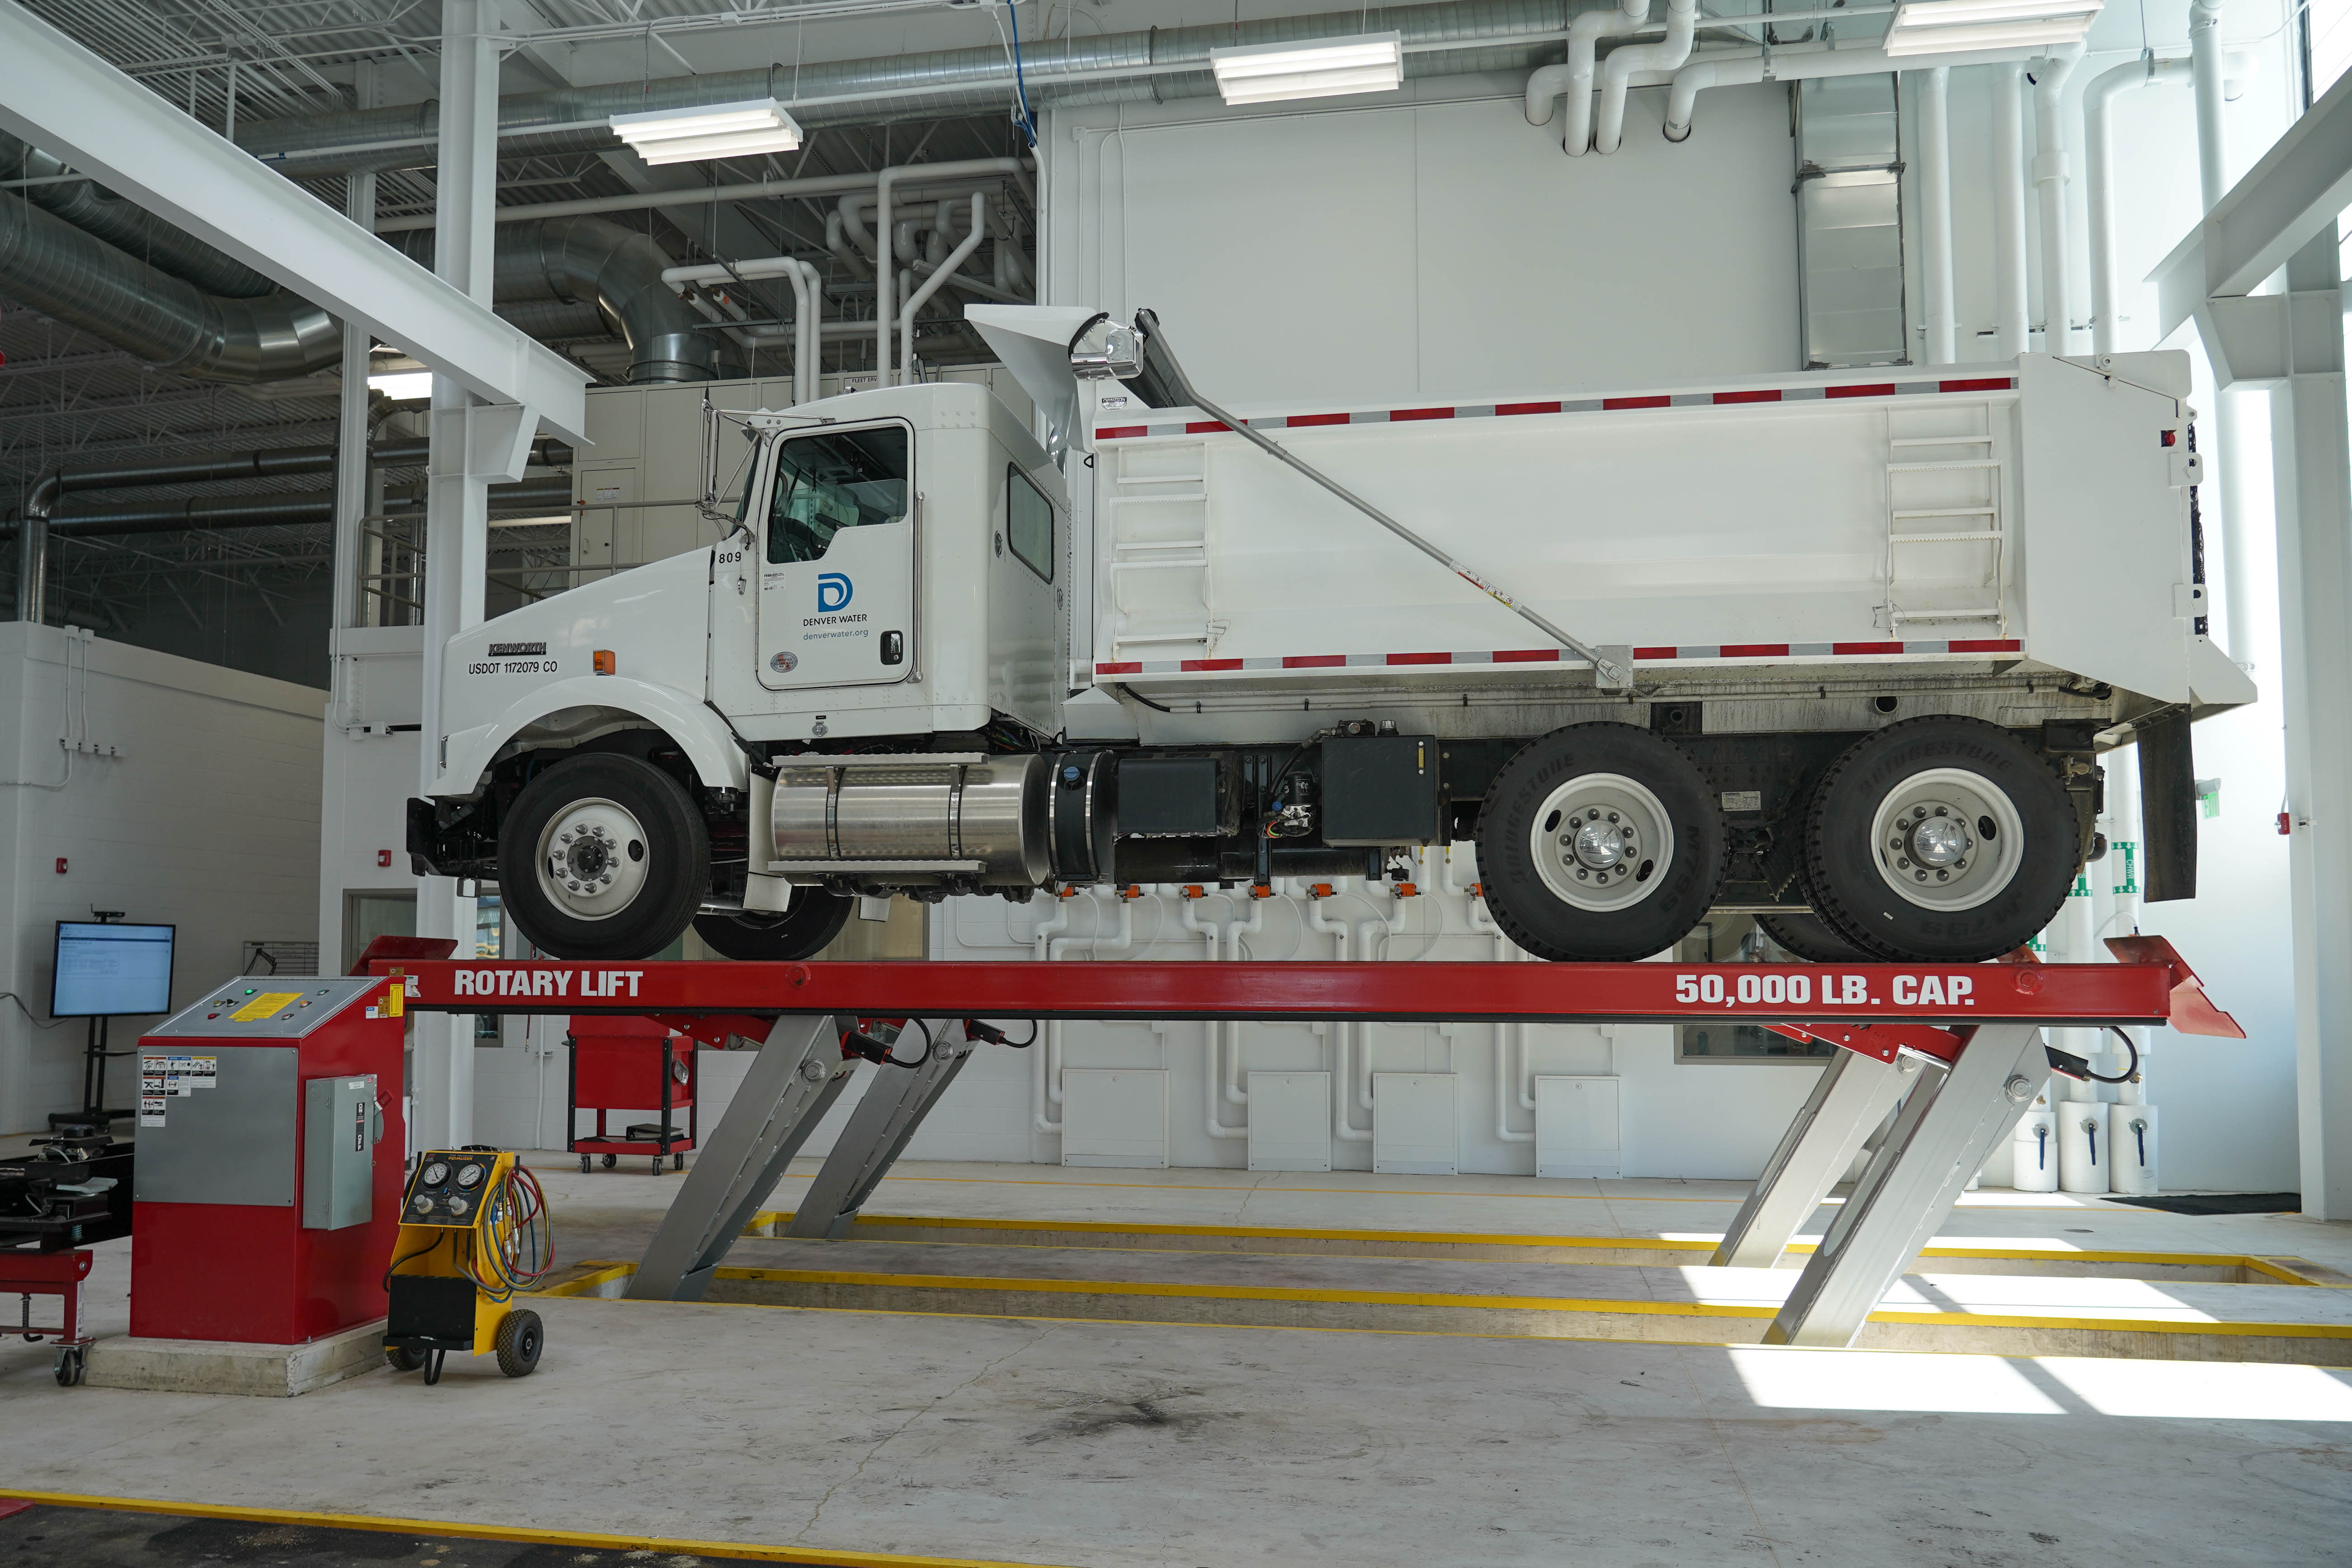 This photo shows a dump truck up on a lift.